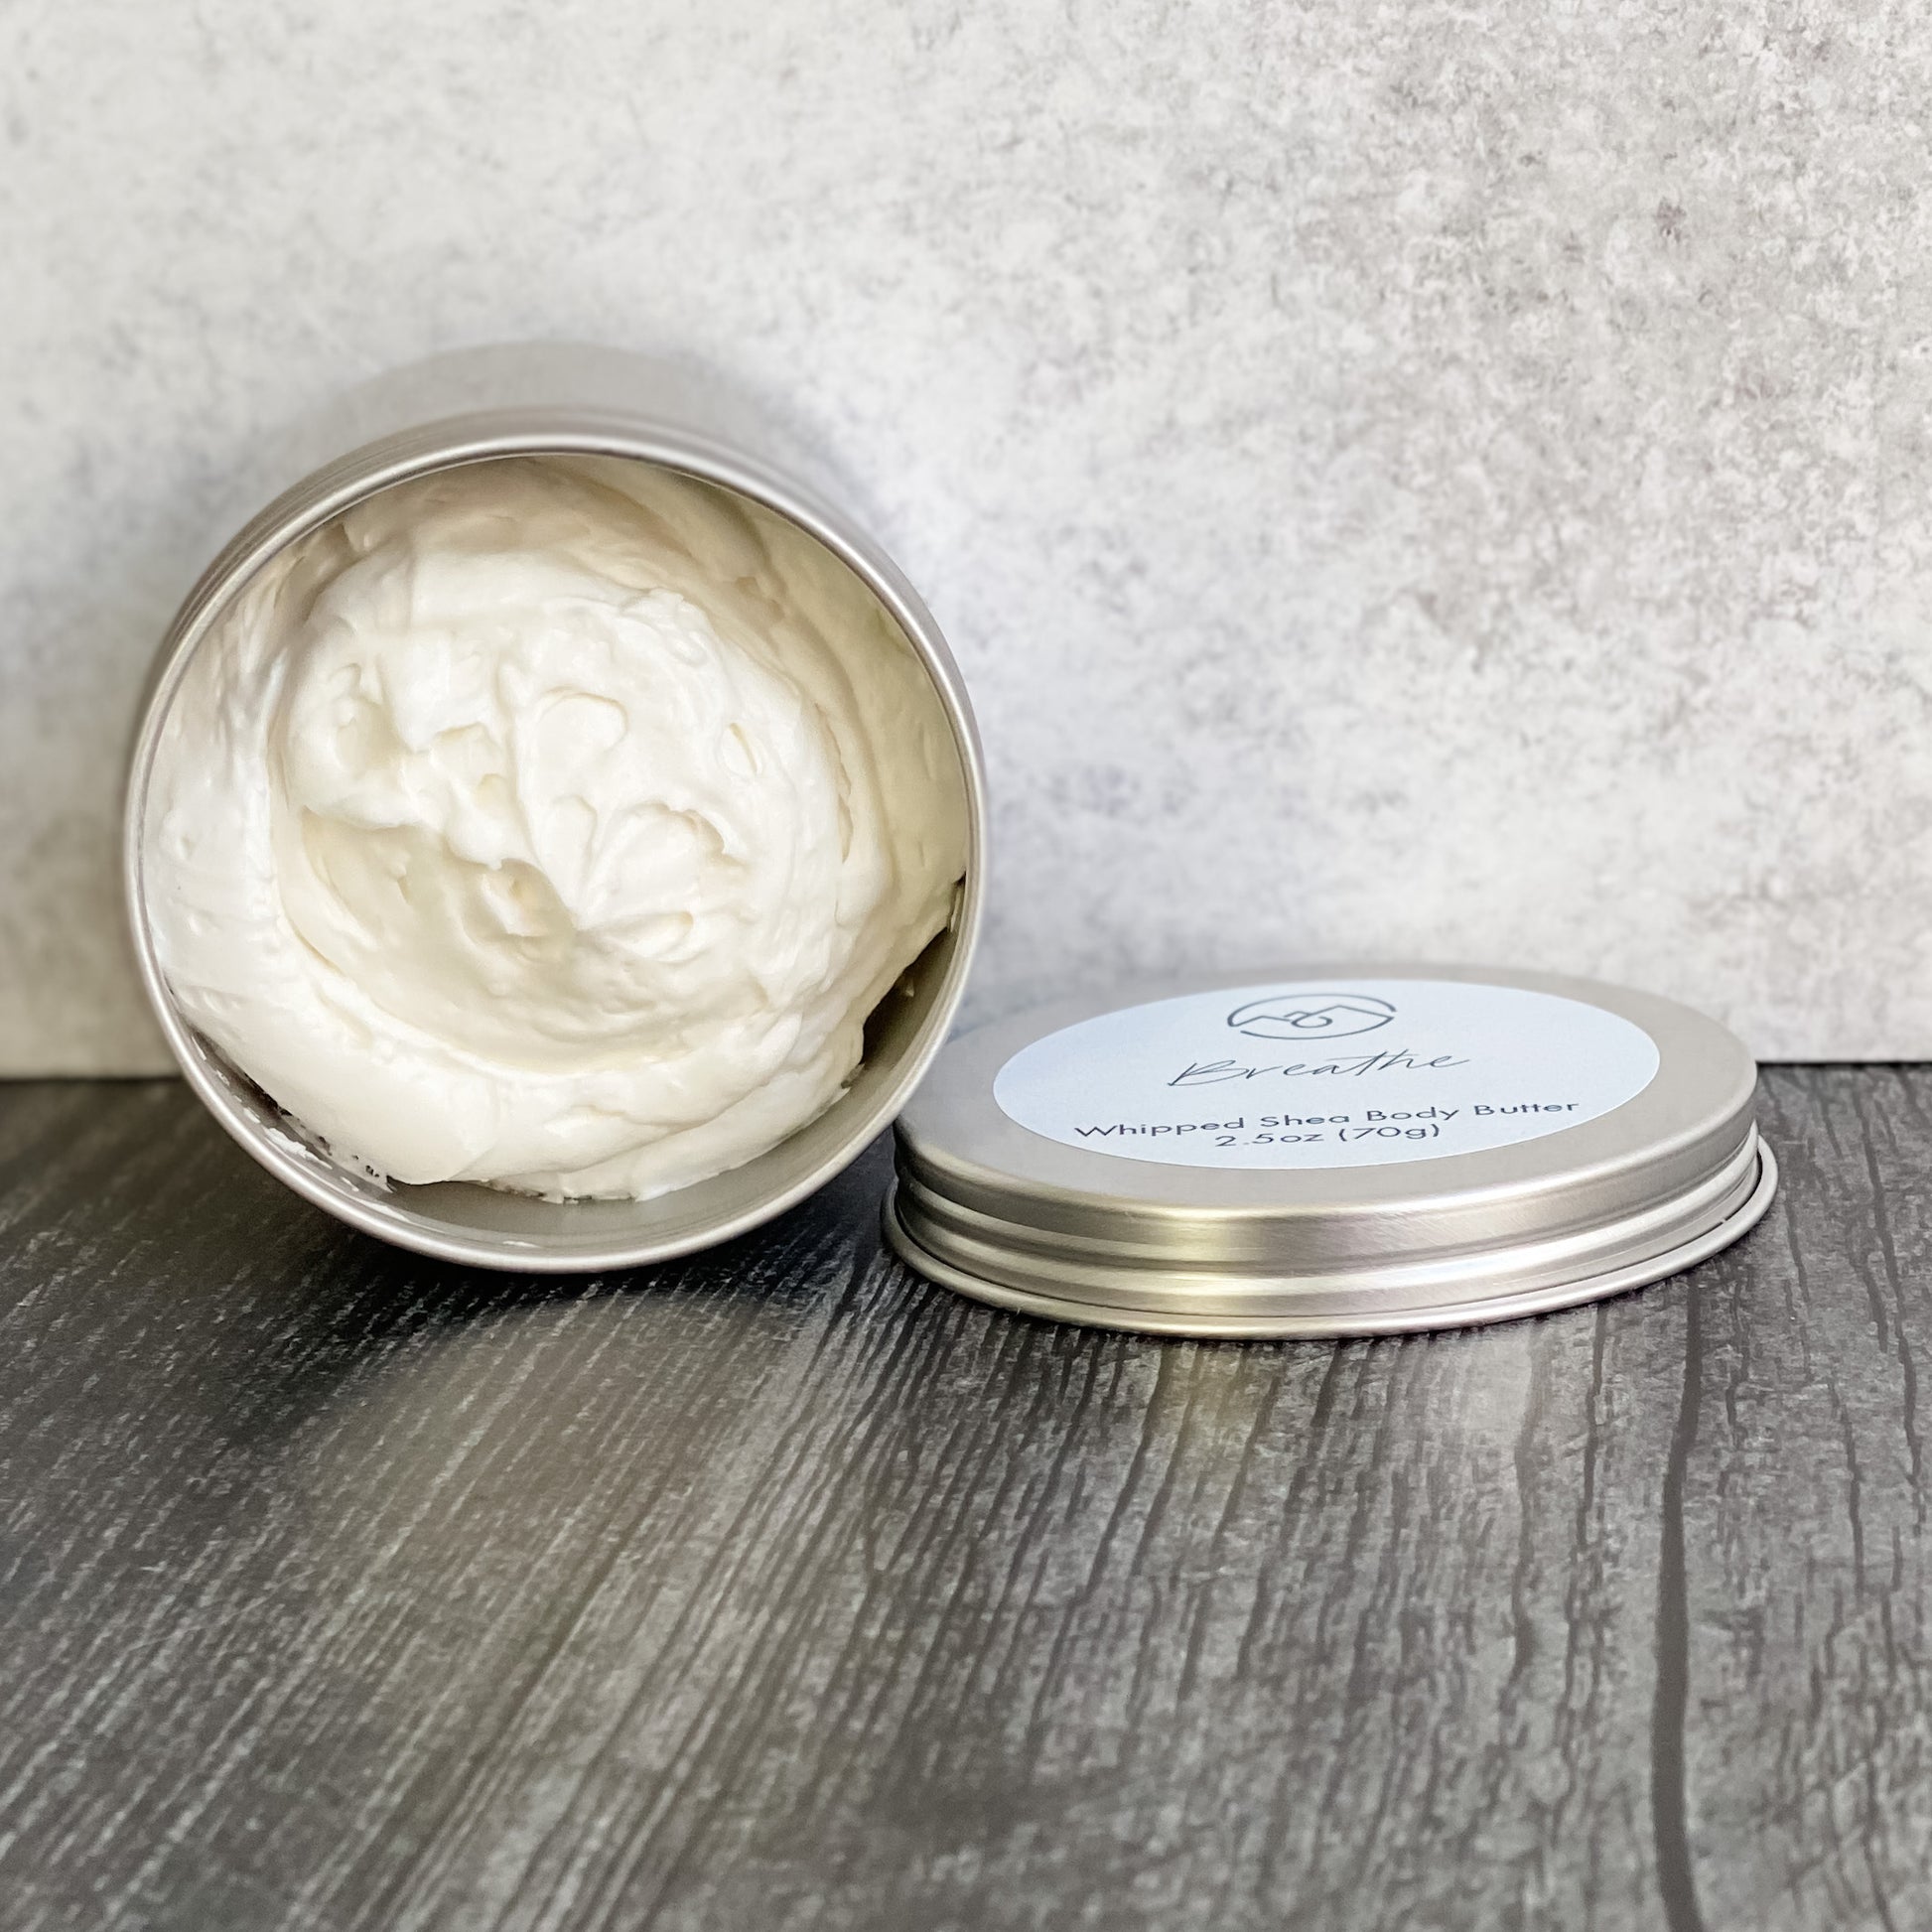 Breathe Whipped Body Butter in open tin turned on its side with lid next to it. Displays how thick and rich this body butter is.